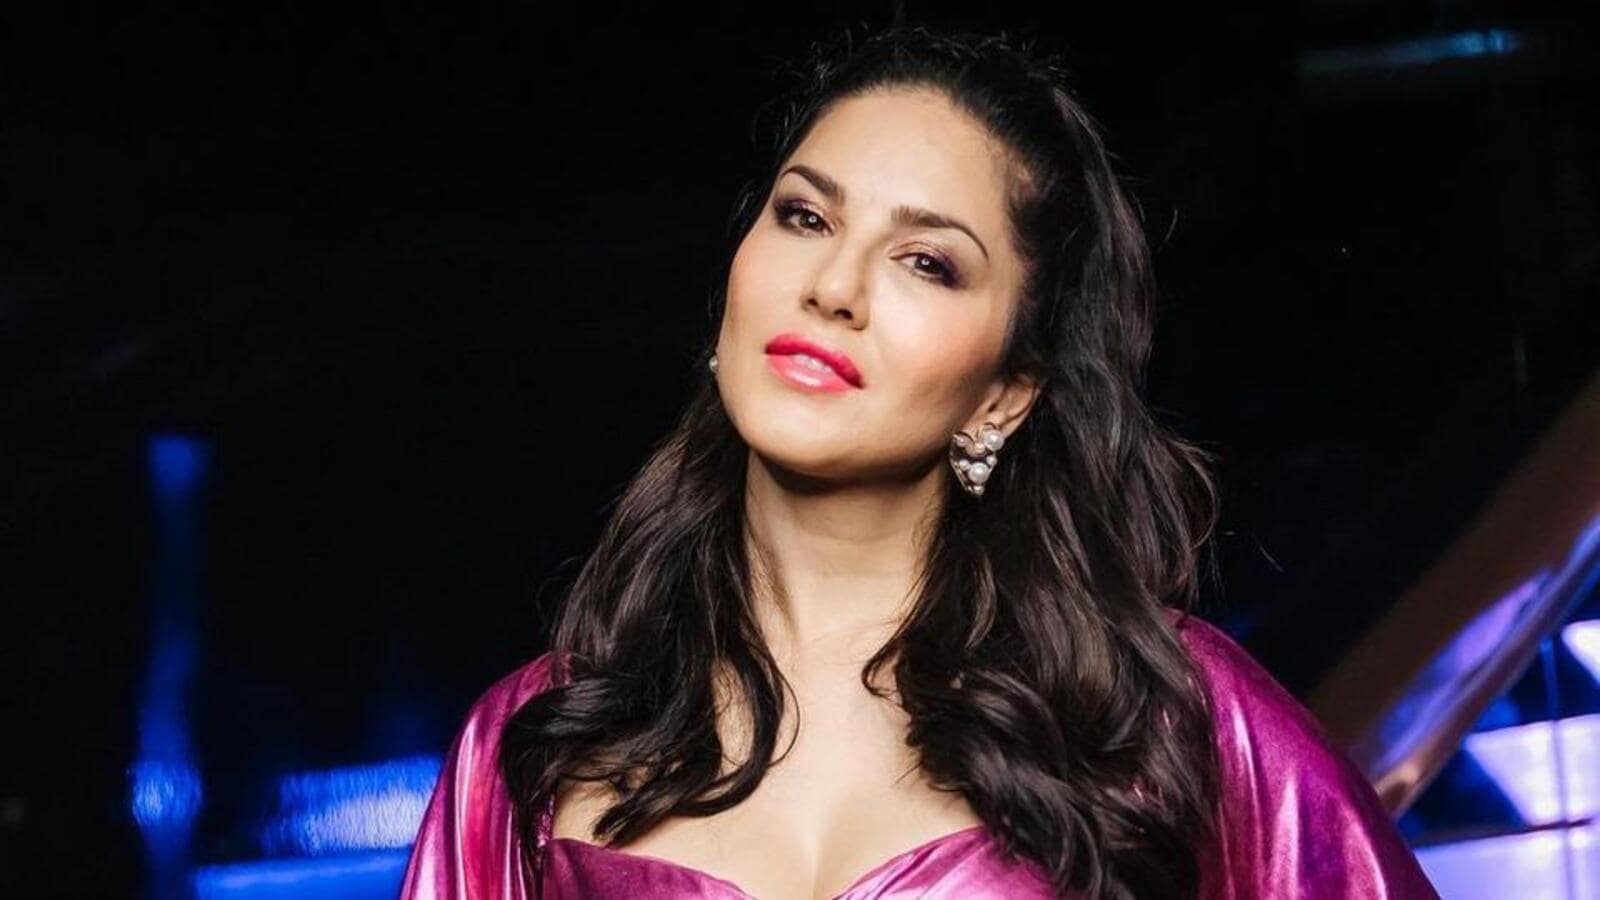 Sunny Leaon School Porn Video Hd - Sunny Leone: Some production houses and people still reluctant to work with  me | Bollywood - Hindustan Times